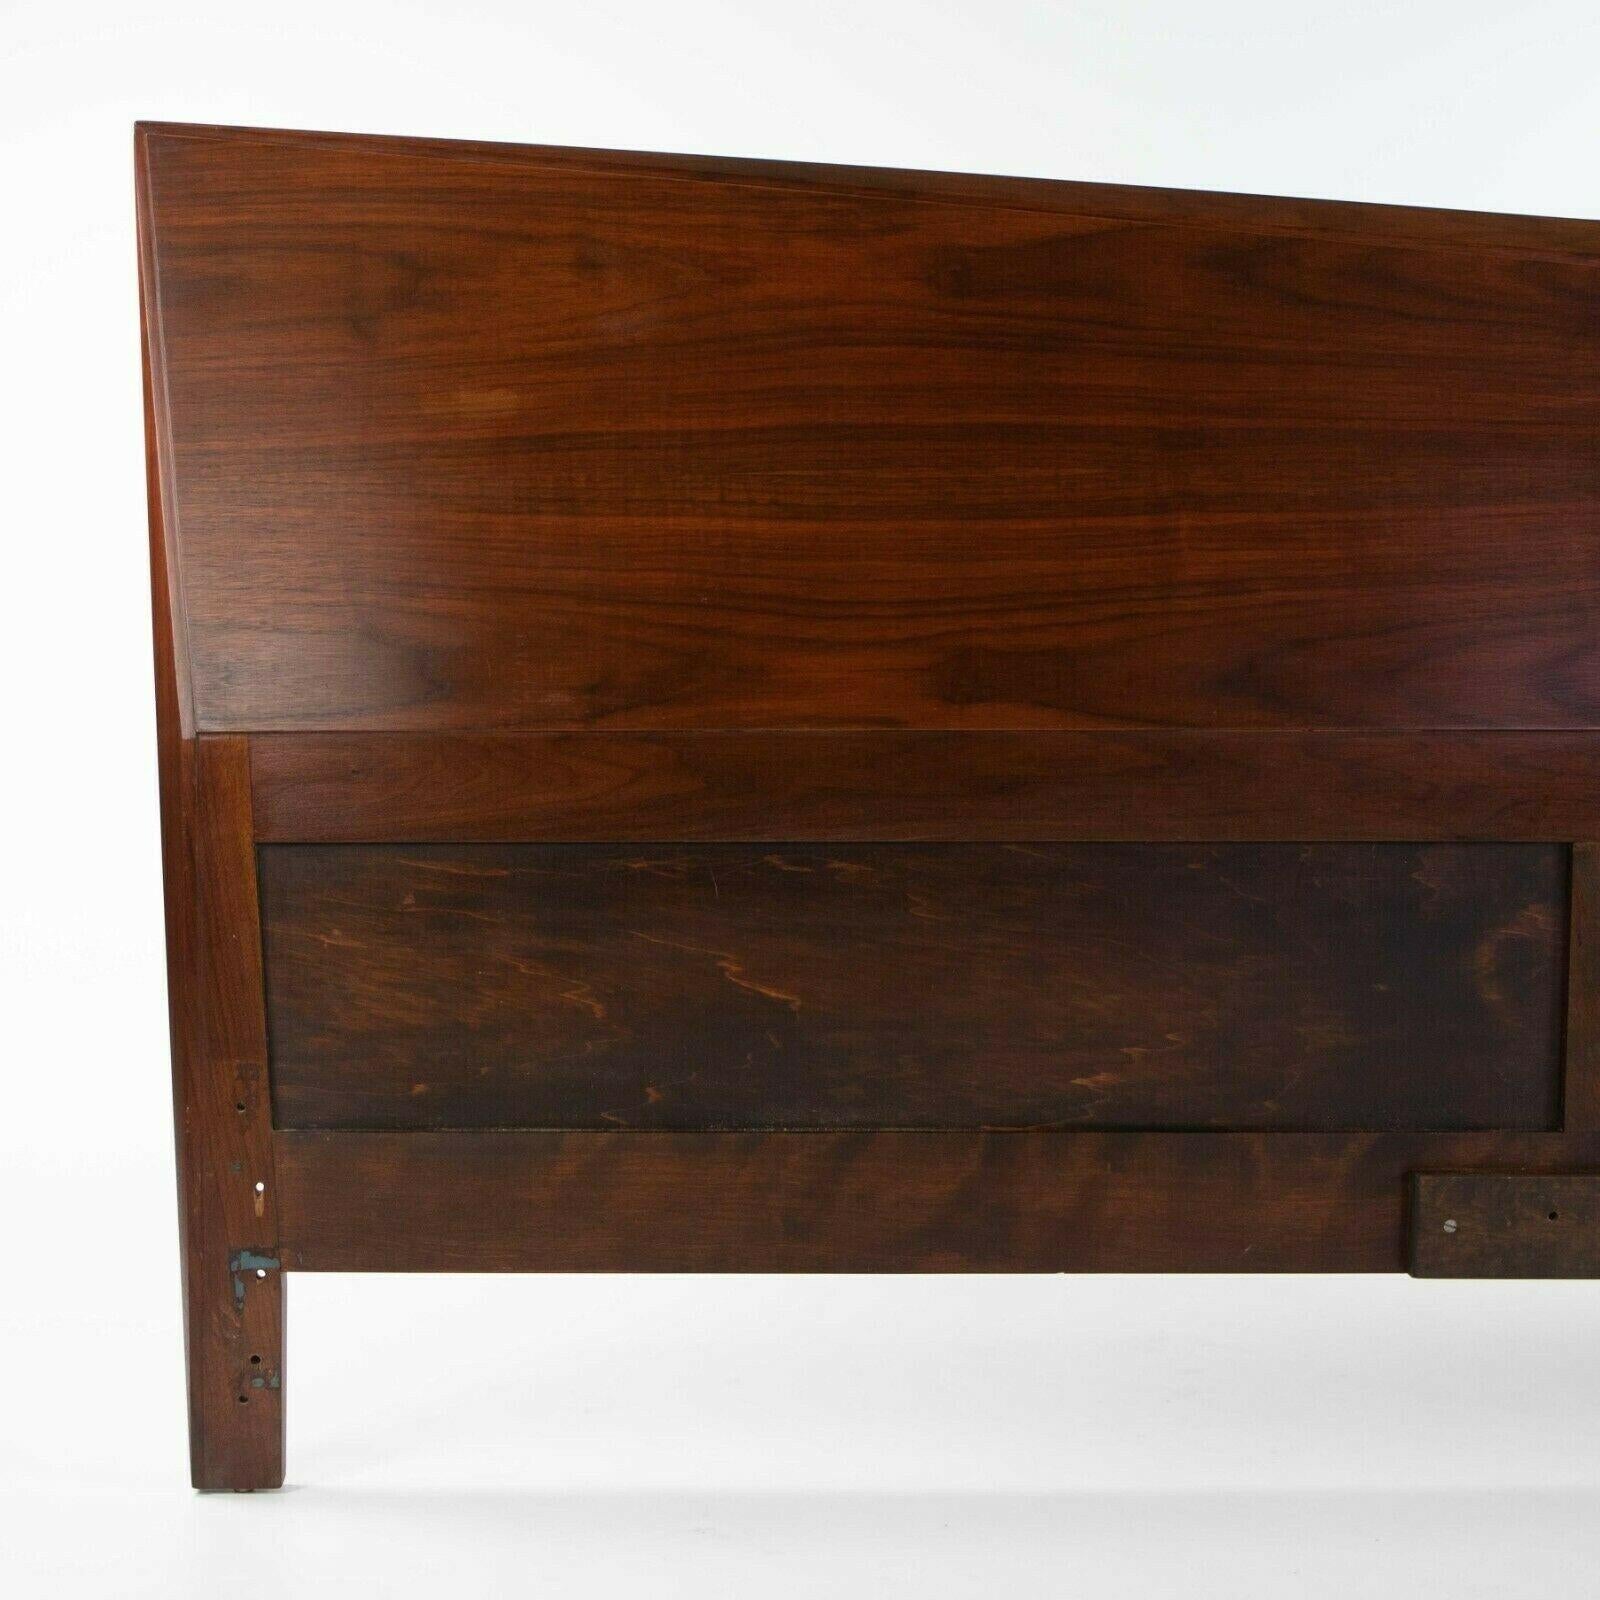 Listed for sale is a gorgeous solid black walnut headboard from a Manhattan estate. The headboard is beautifully constructed and king-size. Whereas most modern pieces of this era were constructed from veneers entirely, this appears to be mostly if